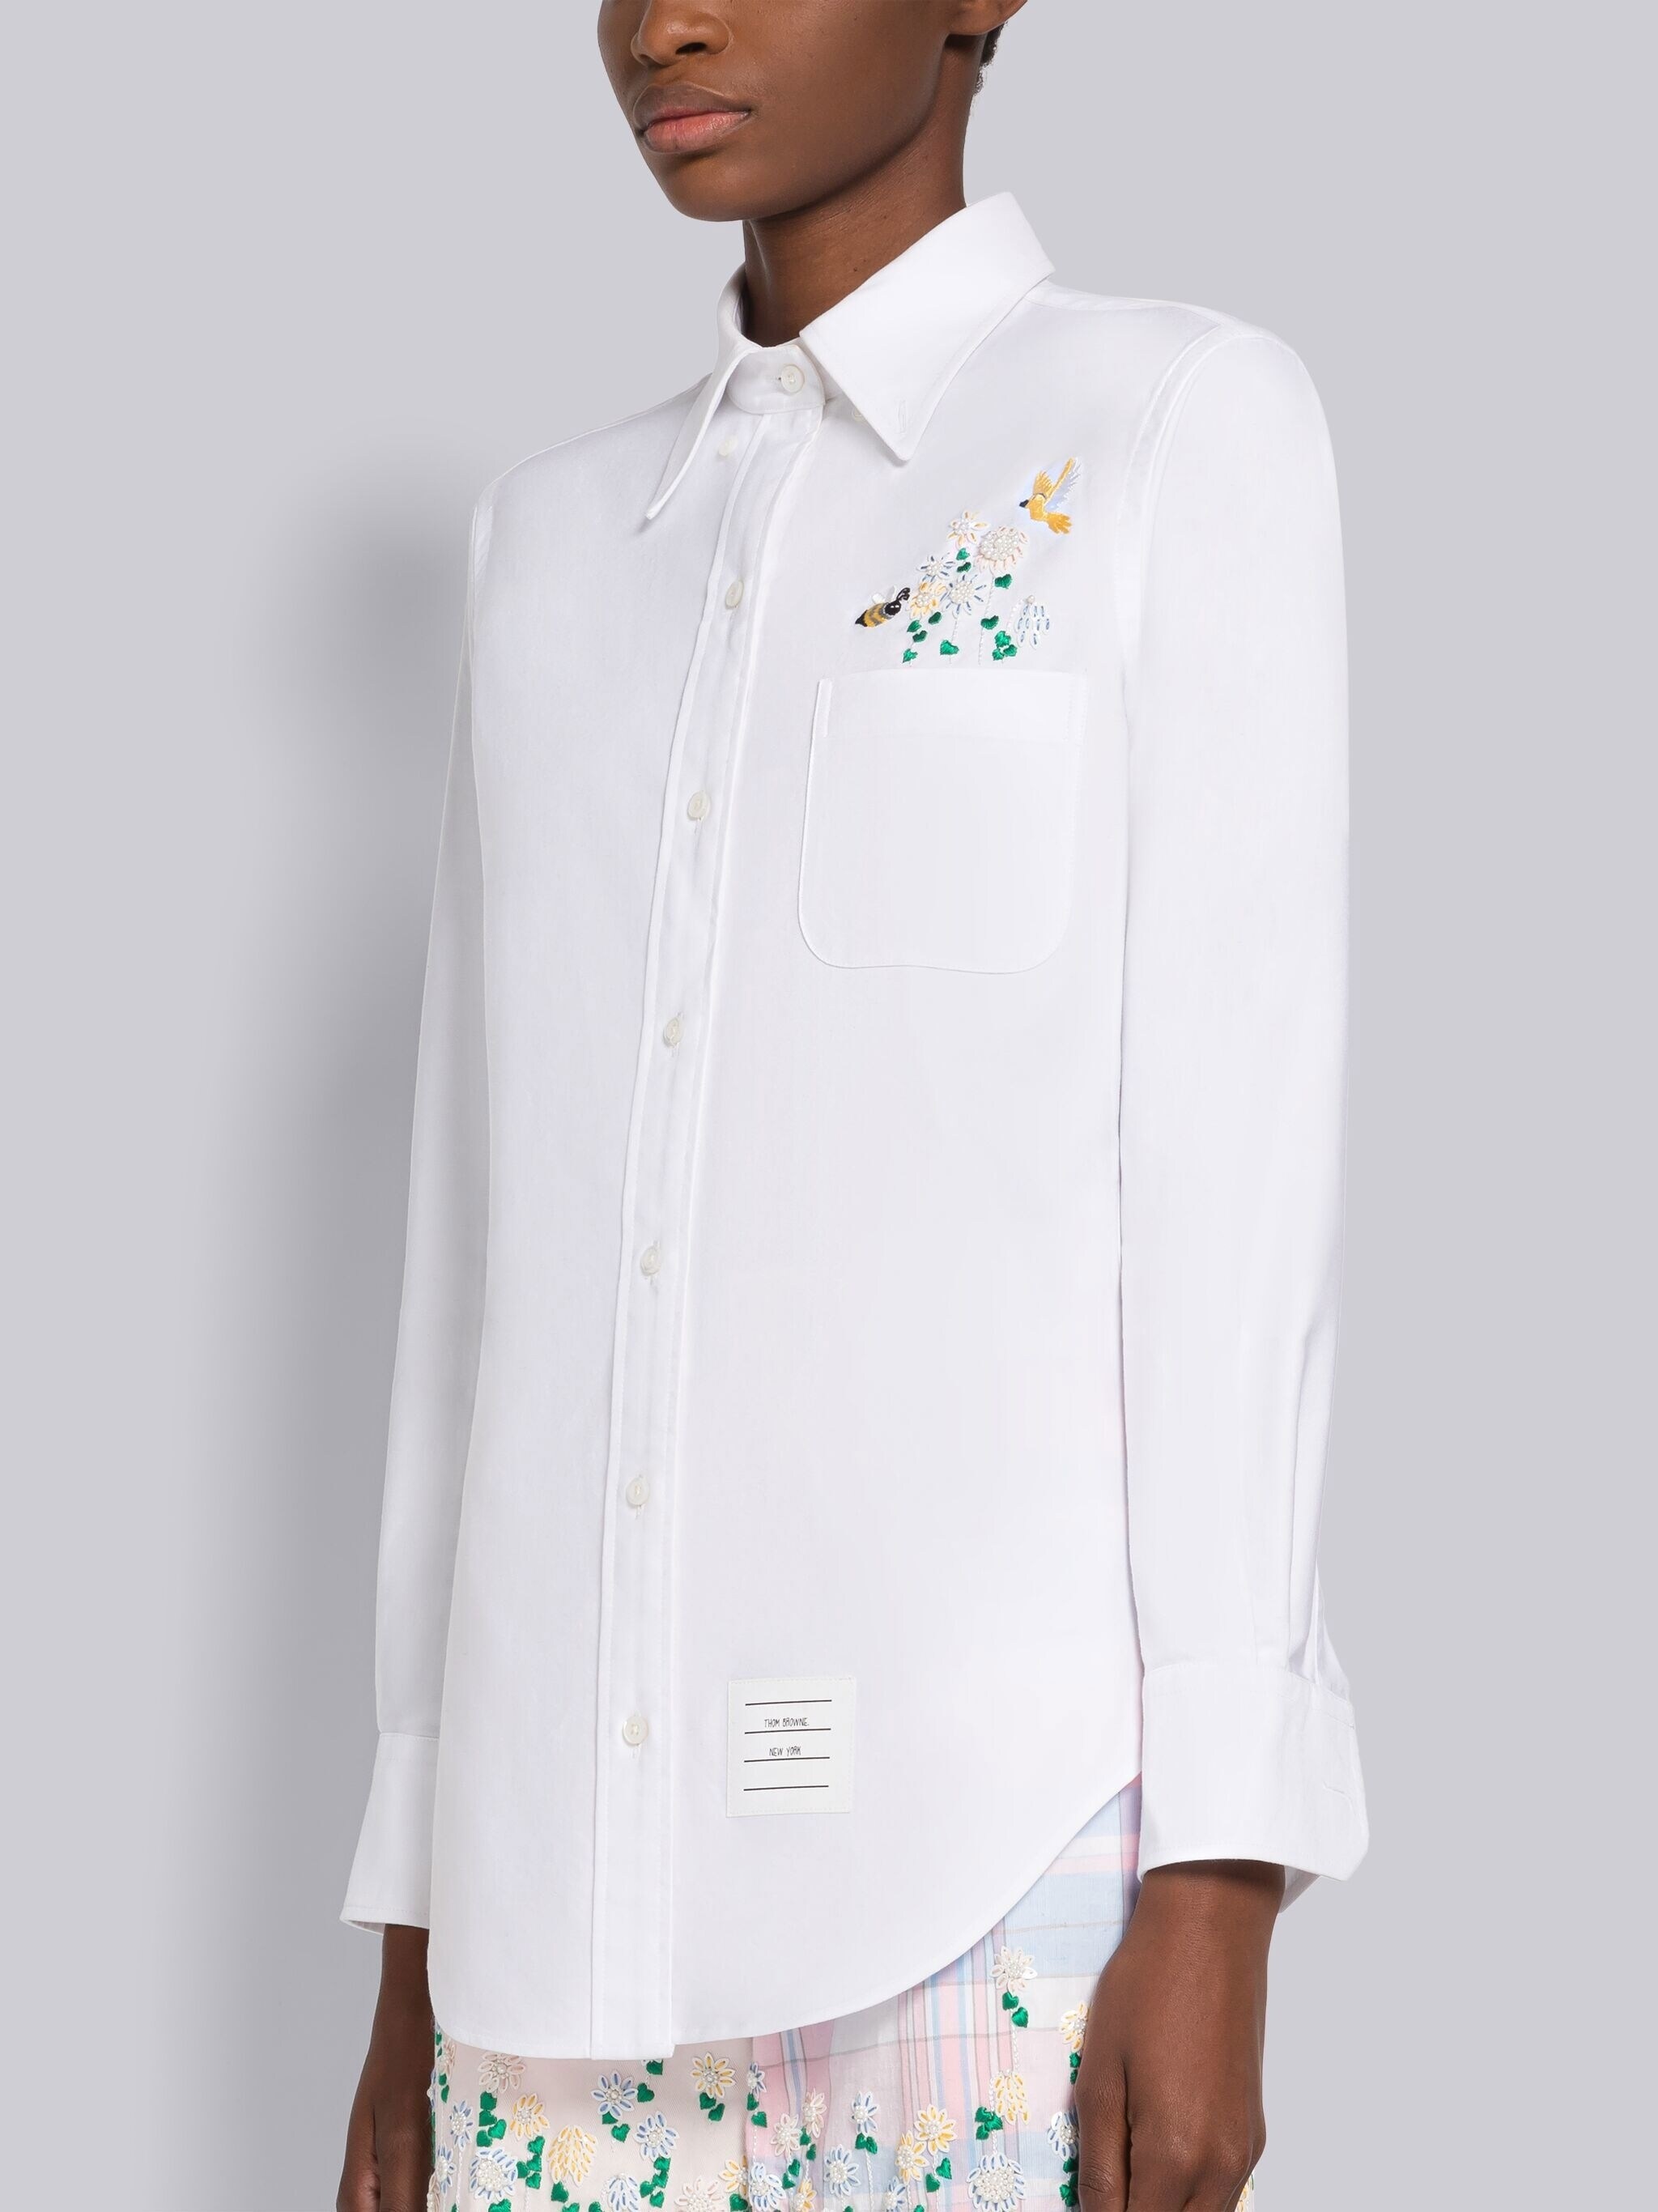 Oxford Sequin Embroidery Point Collar Shirt - 2